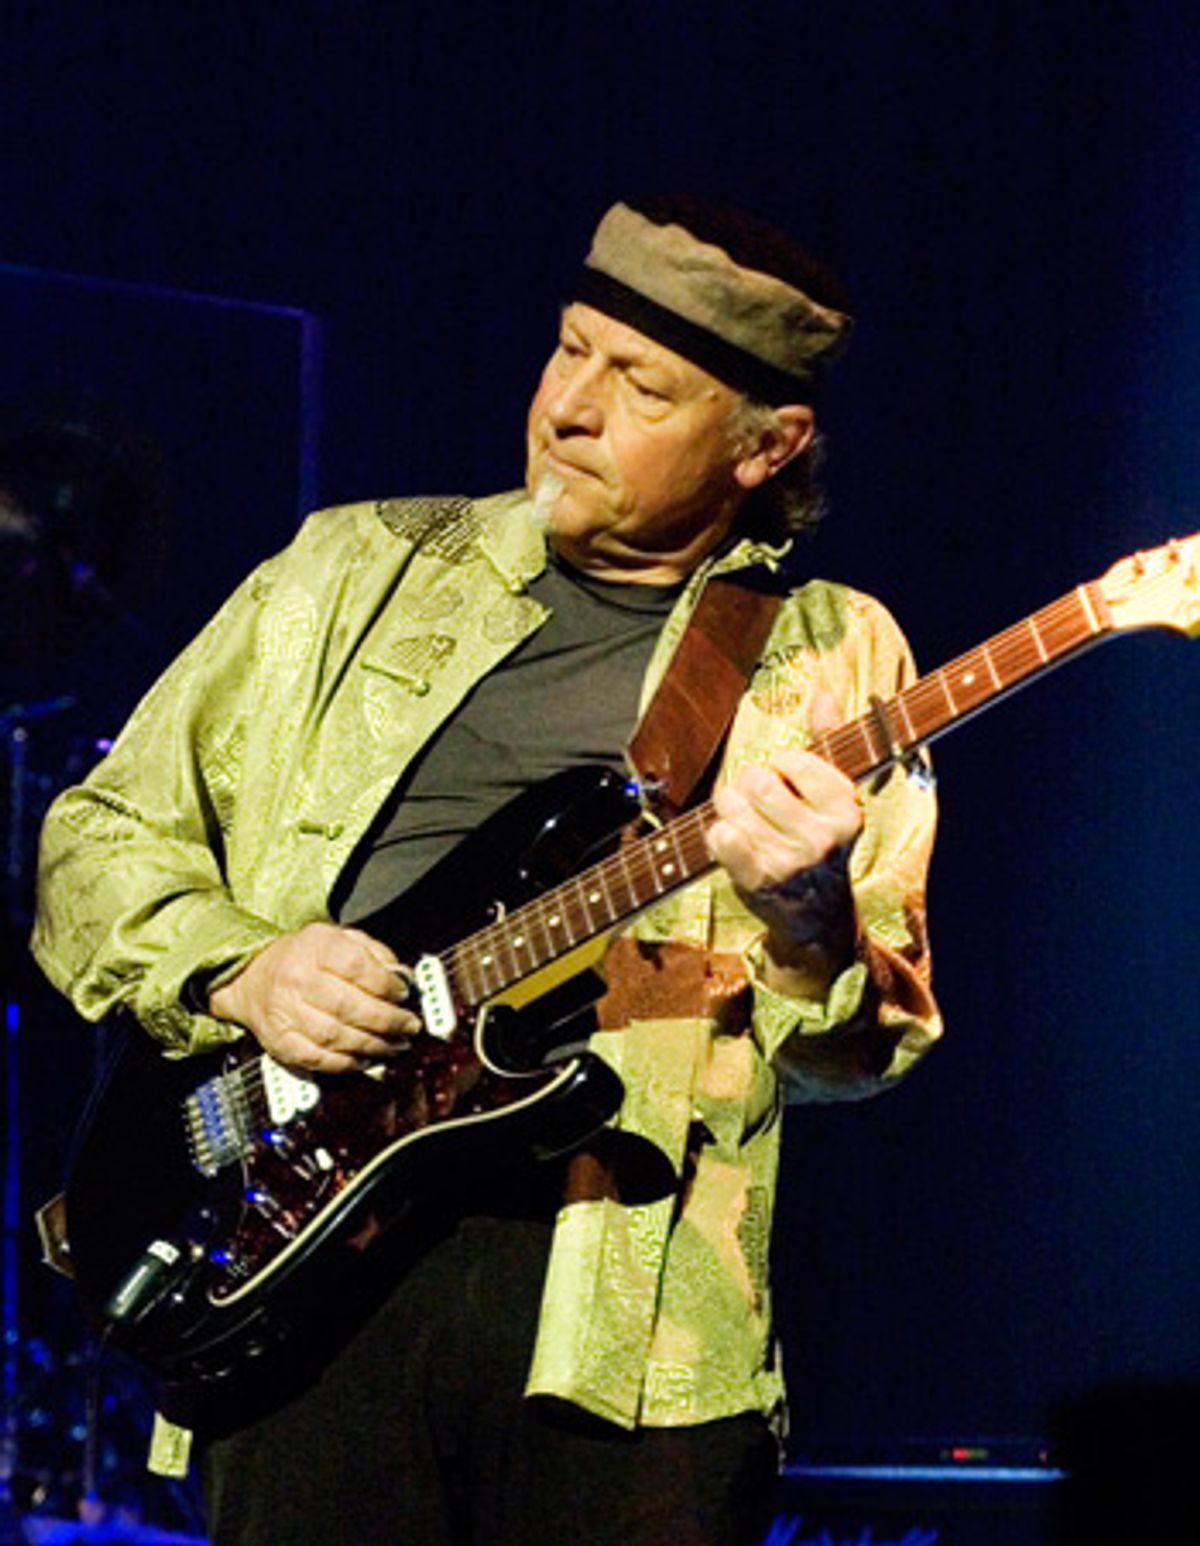 Interview: Martin Barre - Taking Aqualung on the Road